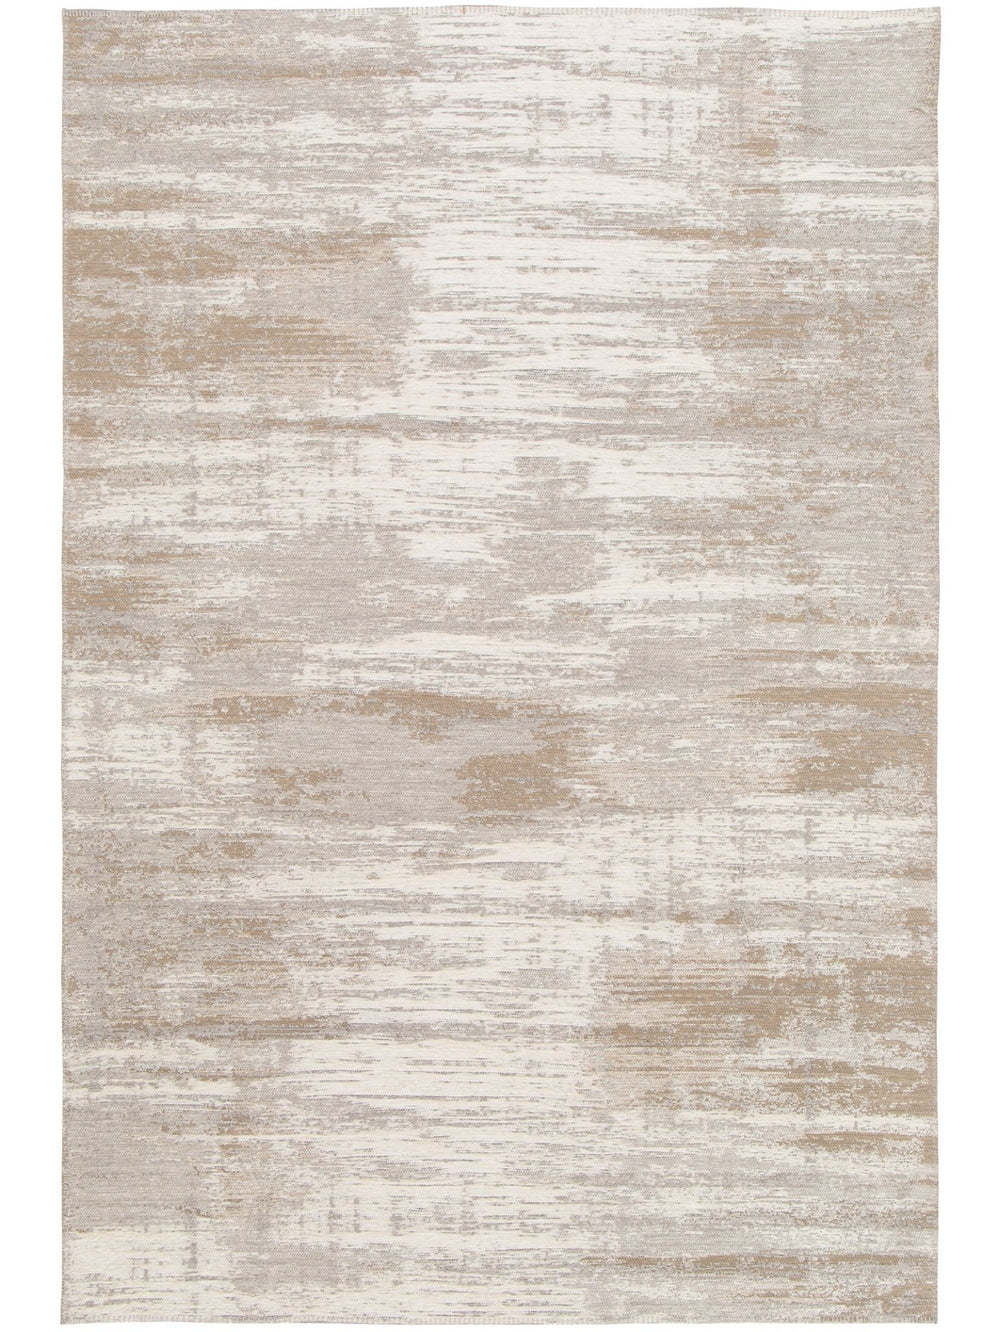 Ecology Rug in Linen - Rugs - Hertex Haus - Abstract